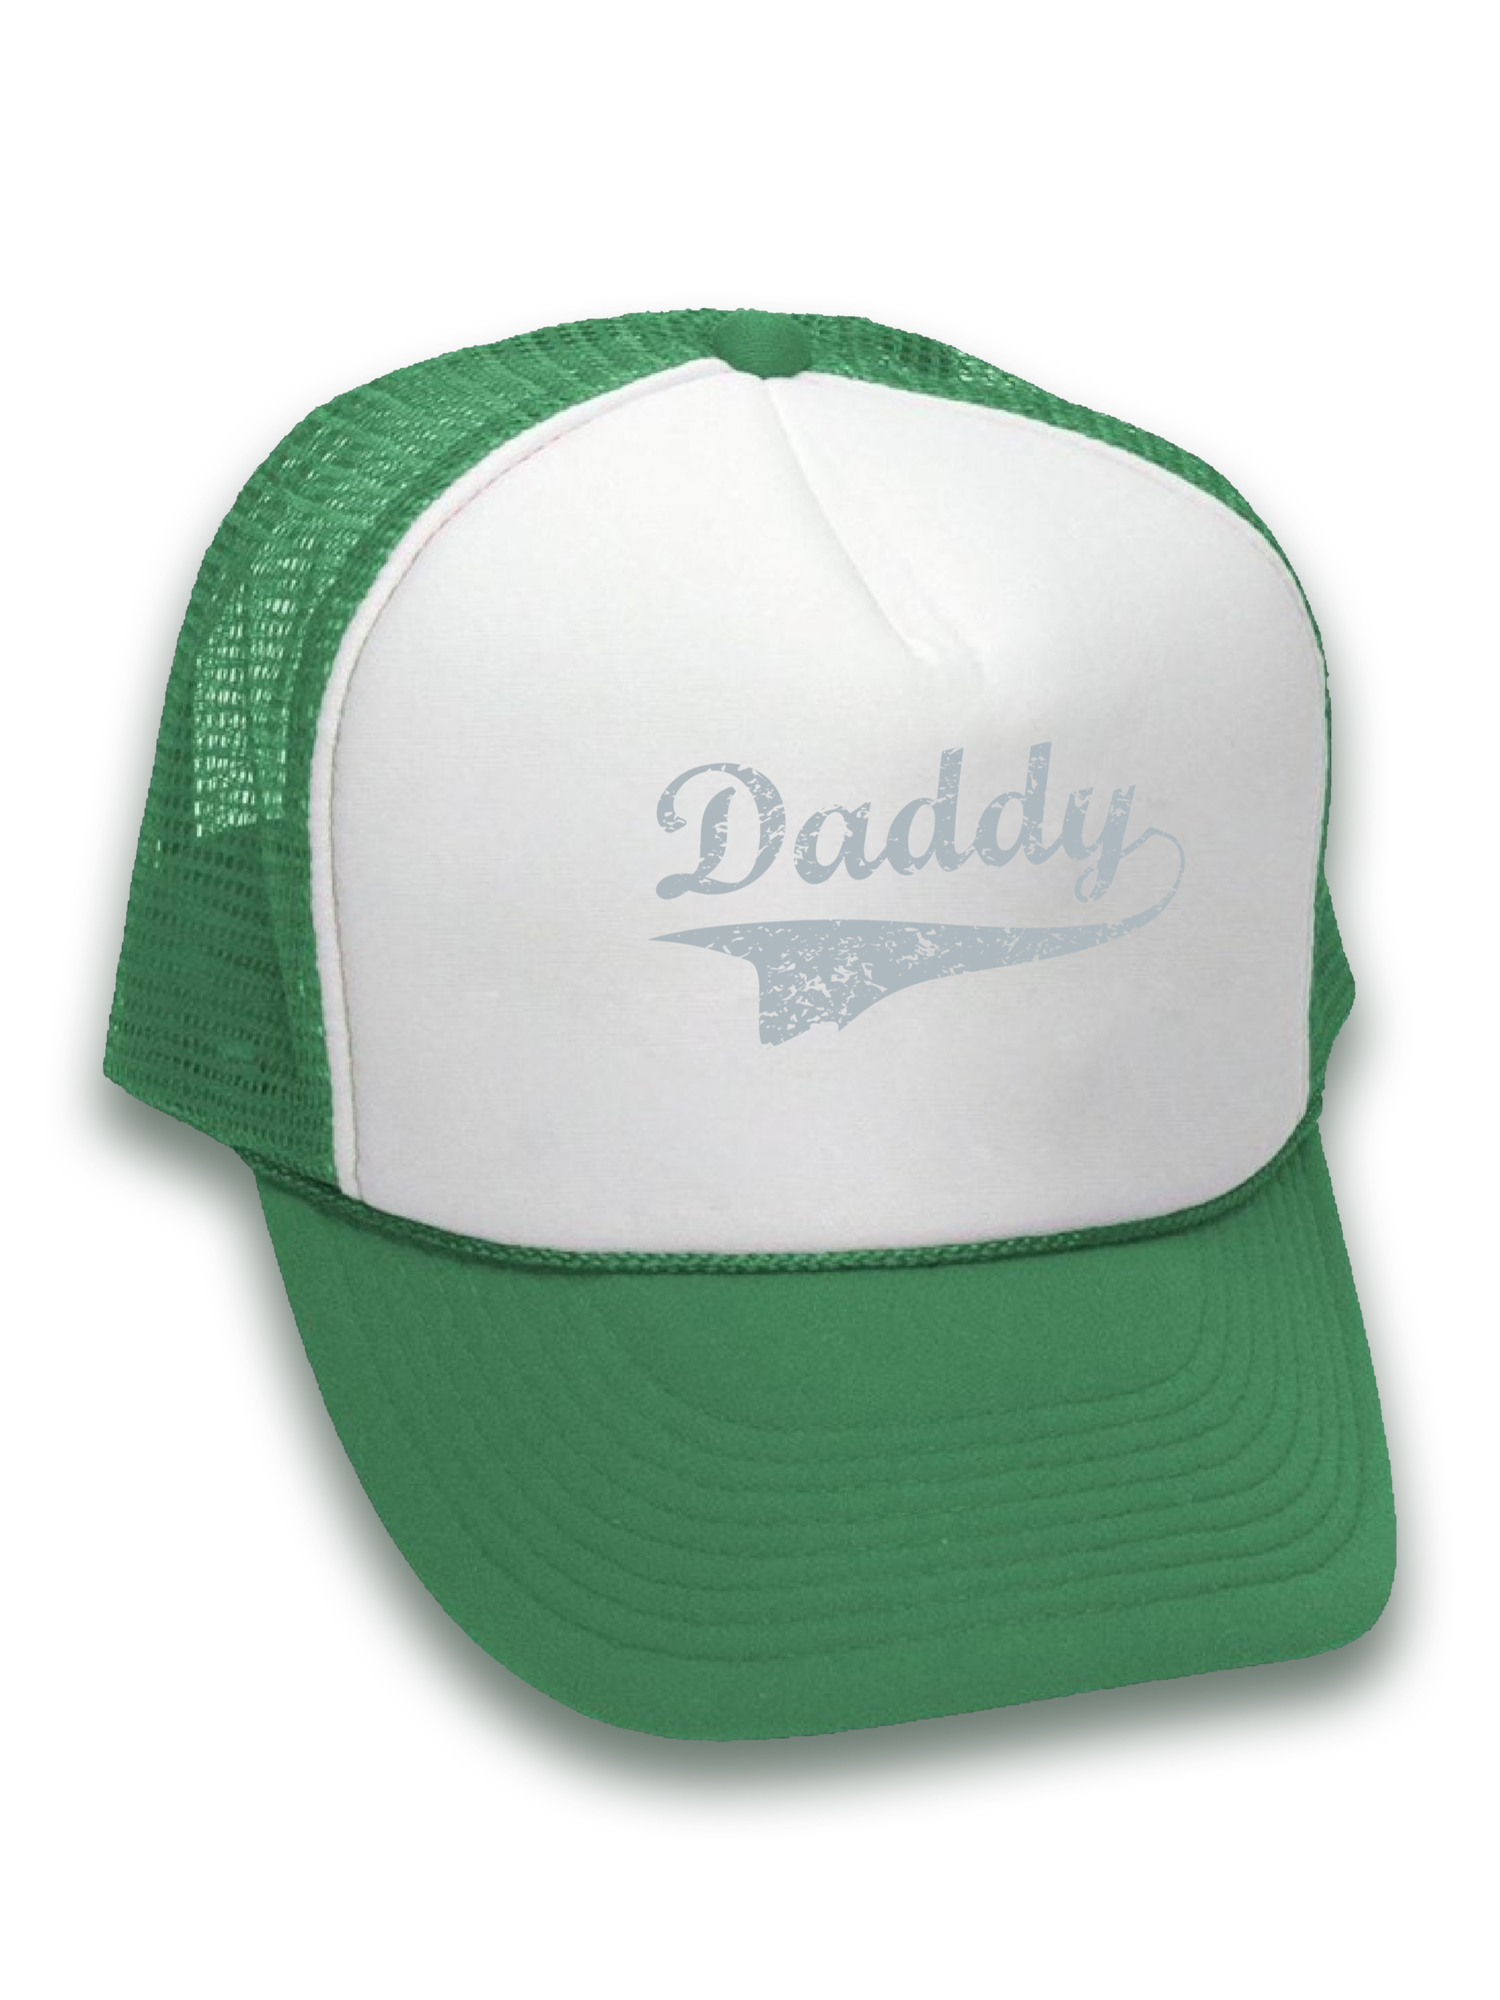 Awkward Styles Daddy Hat Father's Day Gifts for Men Dad Hats Dad 2018 Trucker Hat Funny Gifts for Dad Hat Accessories for Men Father Trucker Hat Daddy 2018 Snapback Hat Dad Hats with Sayings - image 2 of 6